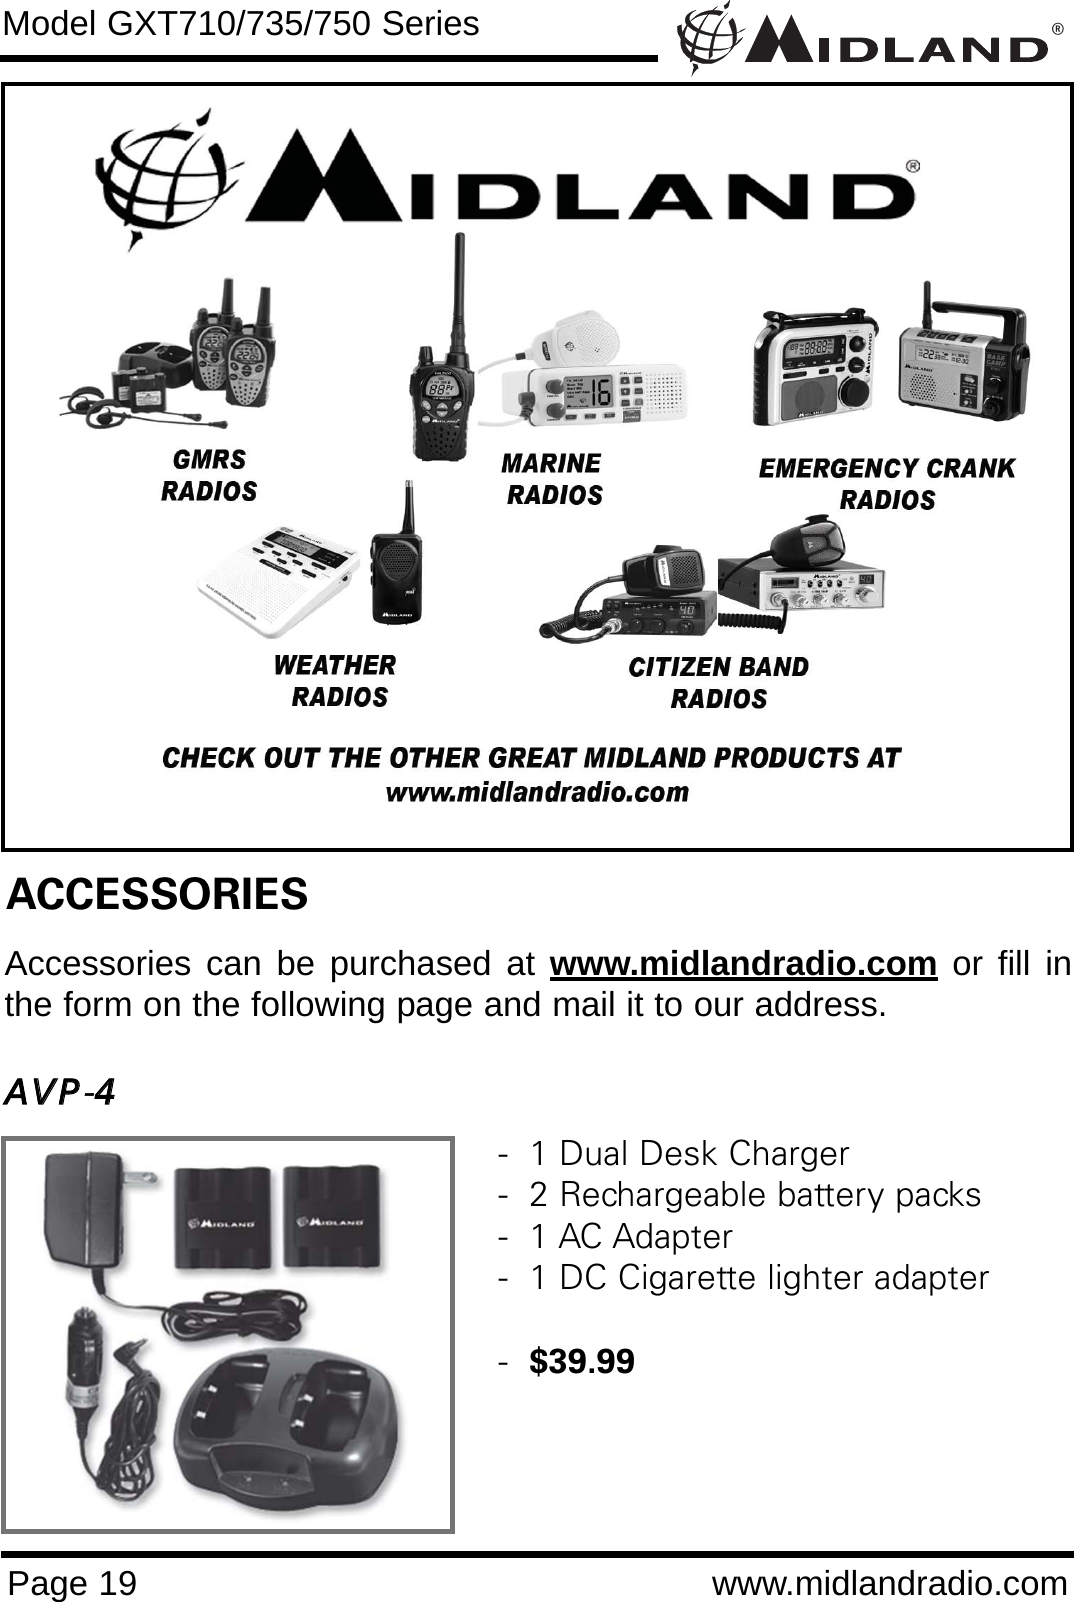 ®Page 19 www.midlandradio.comModel GXT710/735/750 SeriesACCESSORIESAccessories can be purchased at www.midlandradio.com or fill inthe form on the following page and mail it to our address.AAVVPP-44-  1 Dual Desk Charger-  2 Rechargeable battery packs-  1 AC Adapter-  1 DC Cigarette lighter adapter-  $39.99